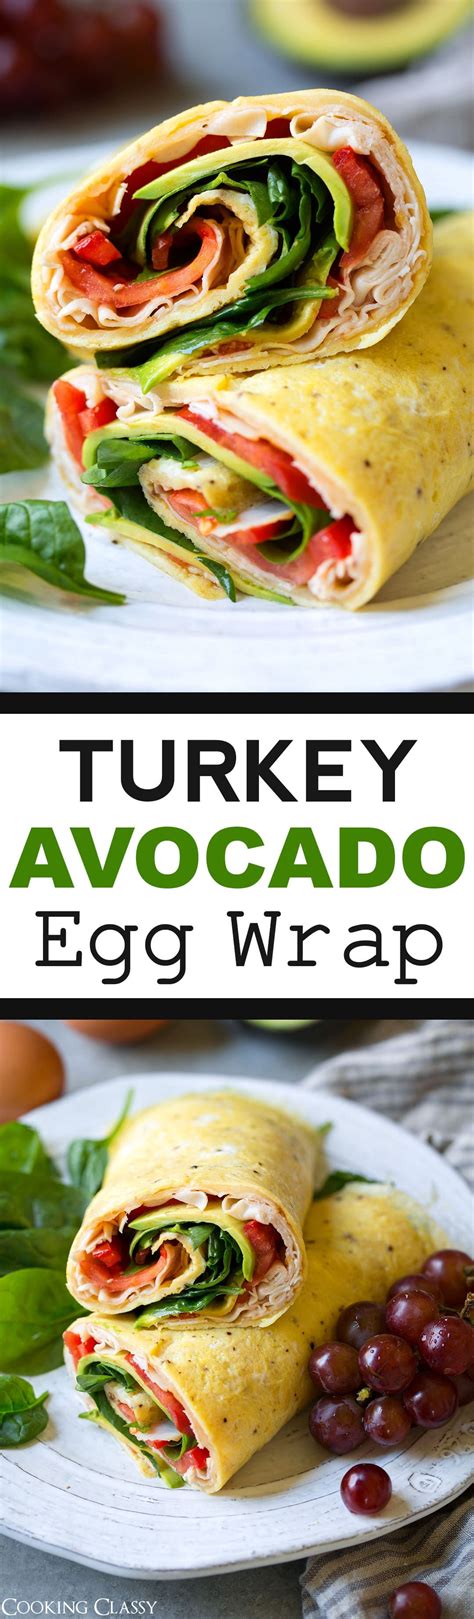 Turkey Avocado Egg Wrap Recipe This Is So Delicious And Quick To Make